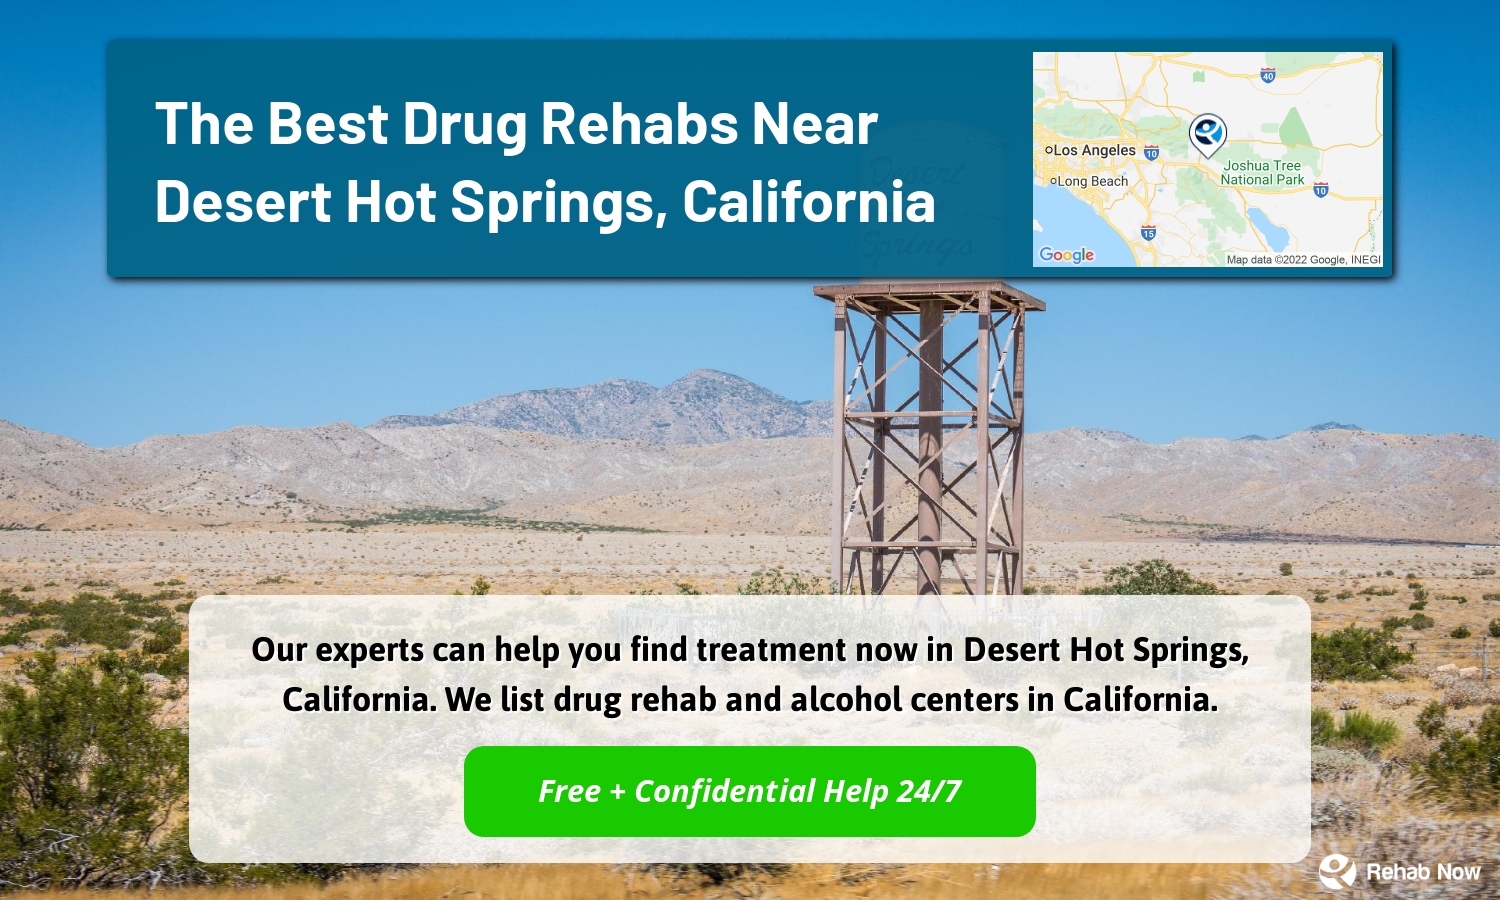 Our experts can help you find treatment now in Desert Hot Springs, California. We list drug rehab and alcohol centers in California.